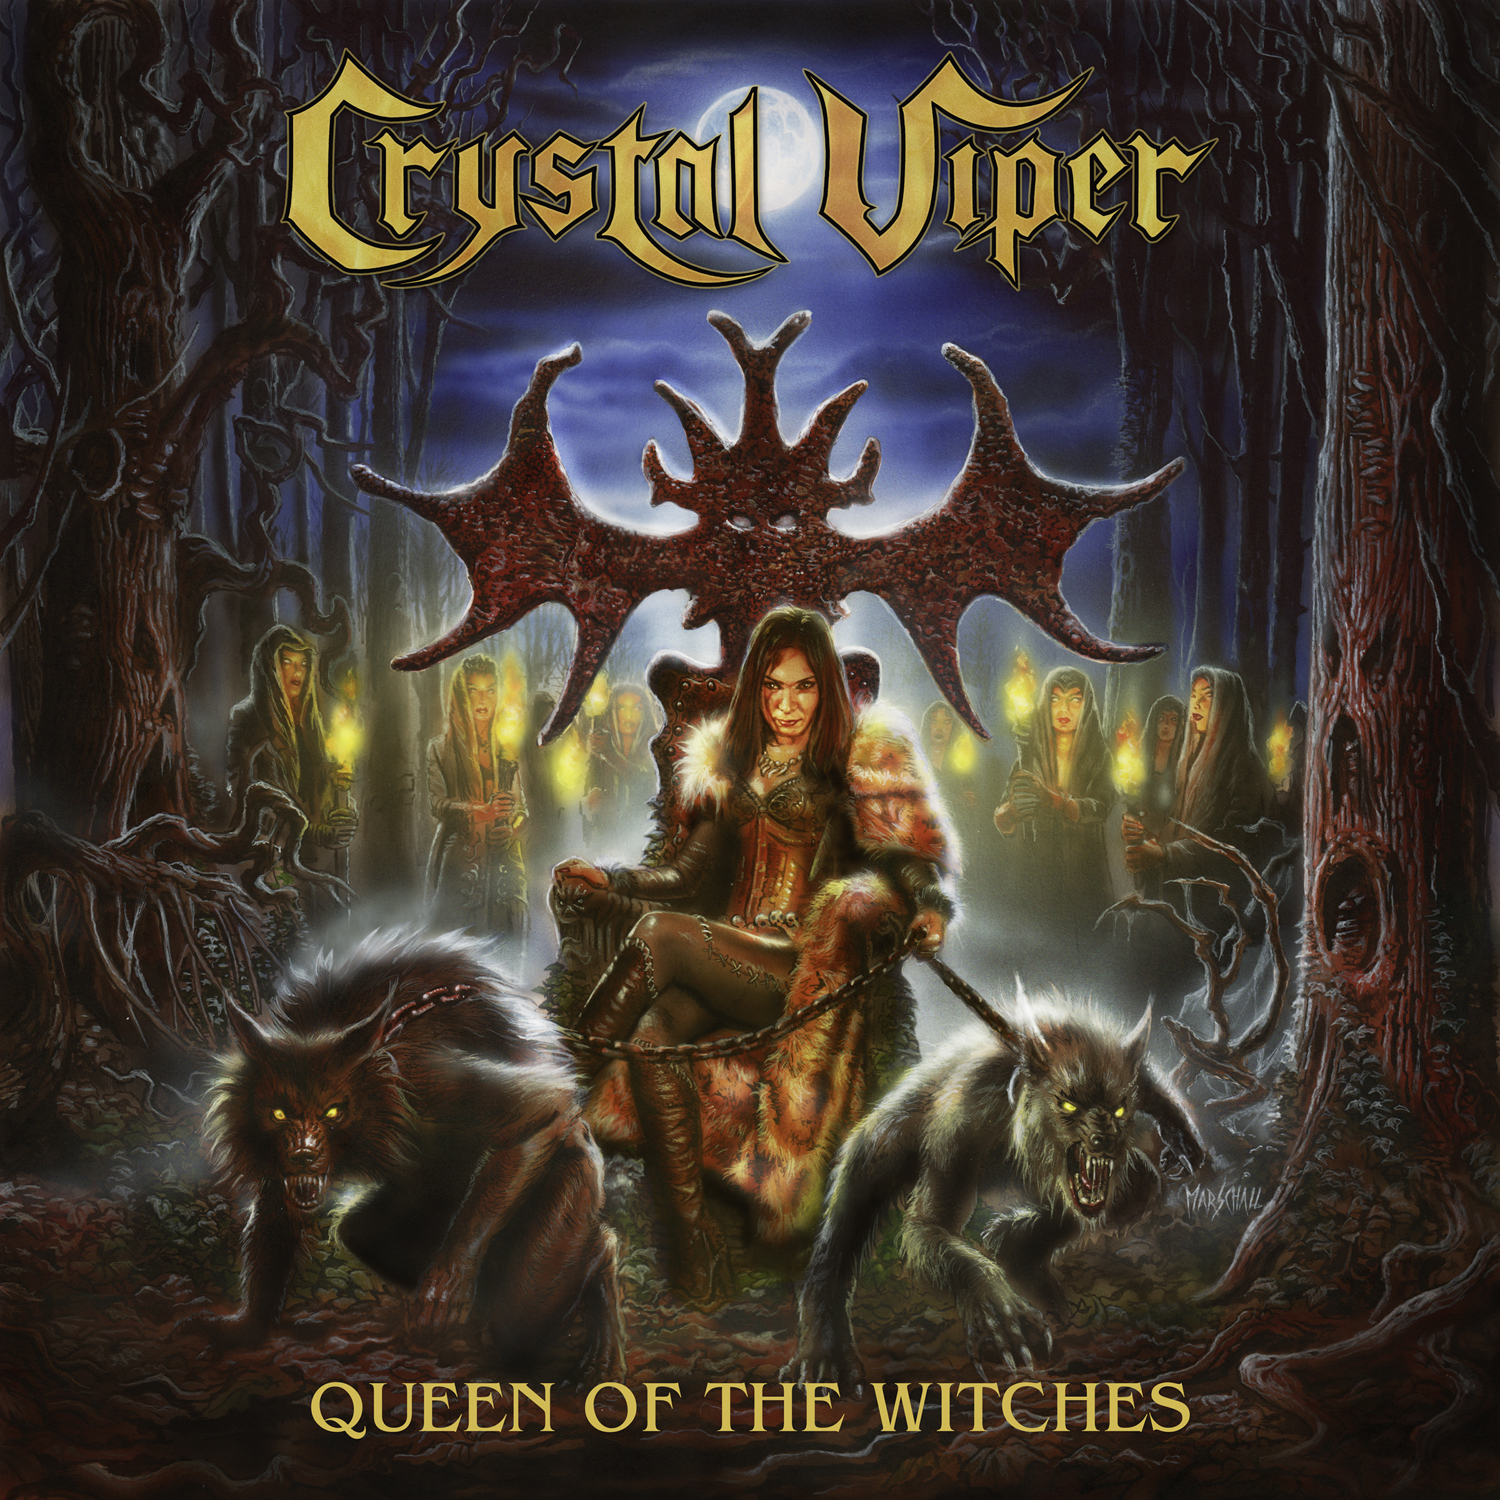 Crystal Viper – Queen of the Witches